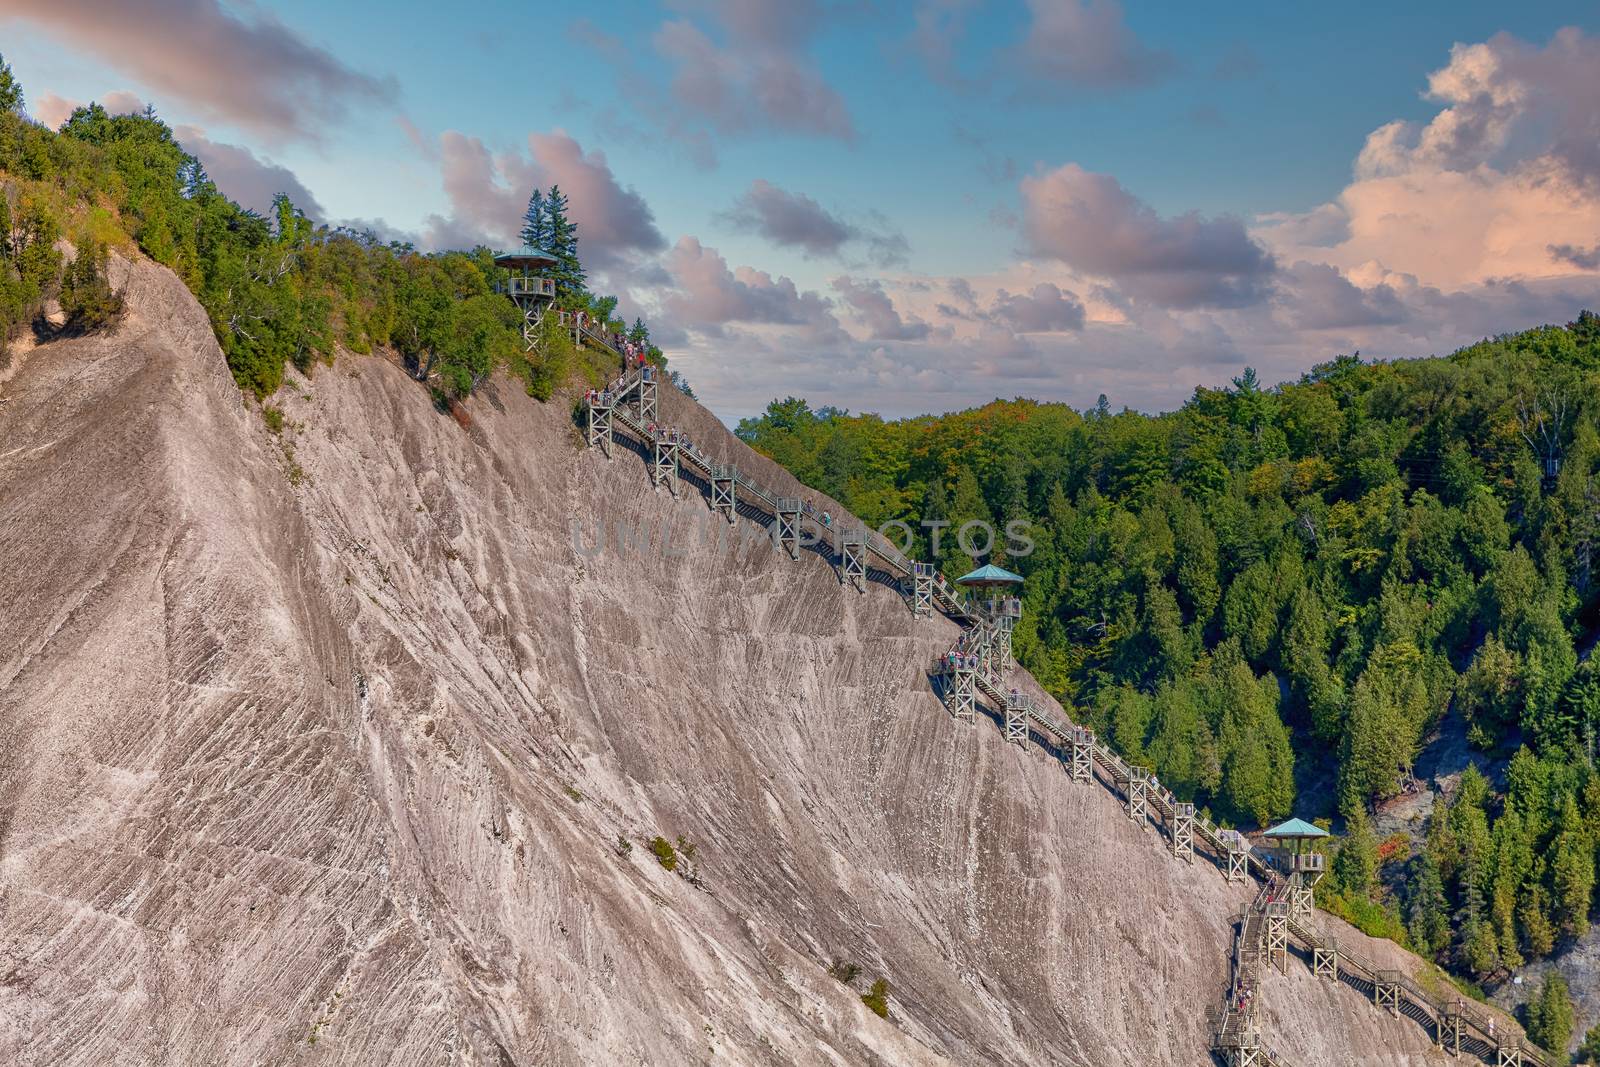 Climbing Path to the top of Montmorency Falls near Quebec City, Quebec, Canada